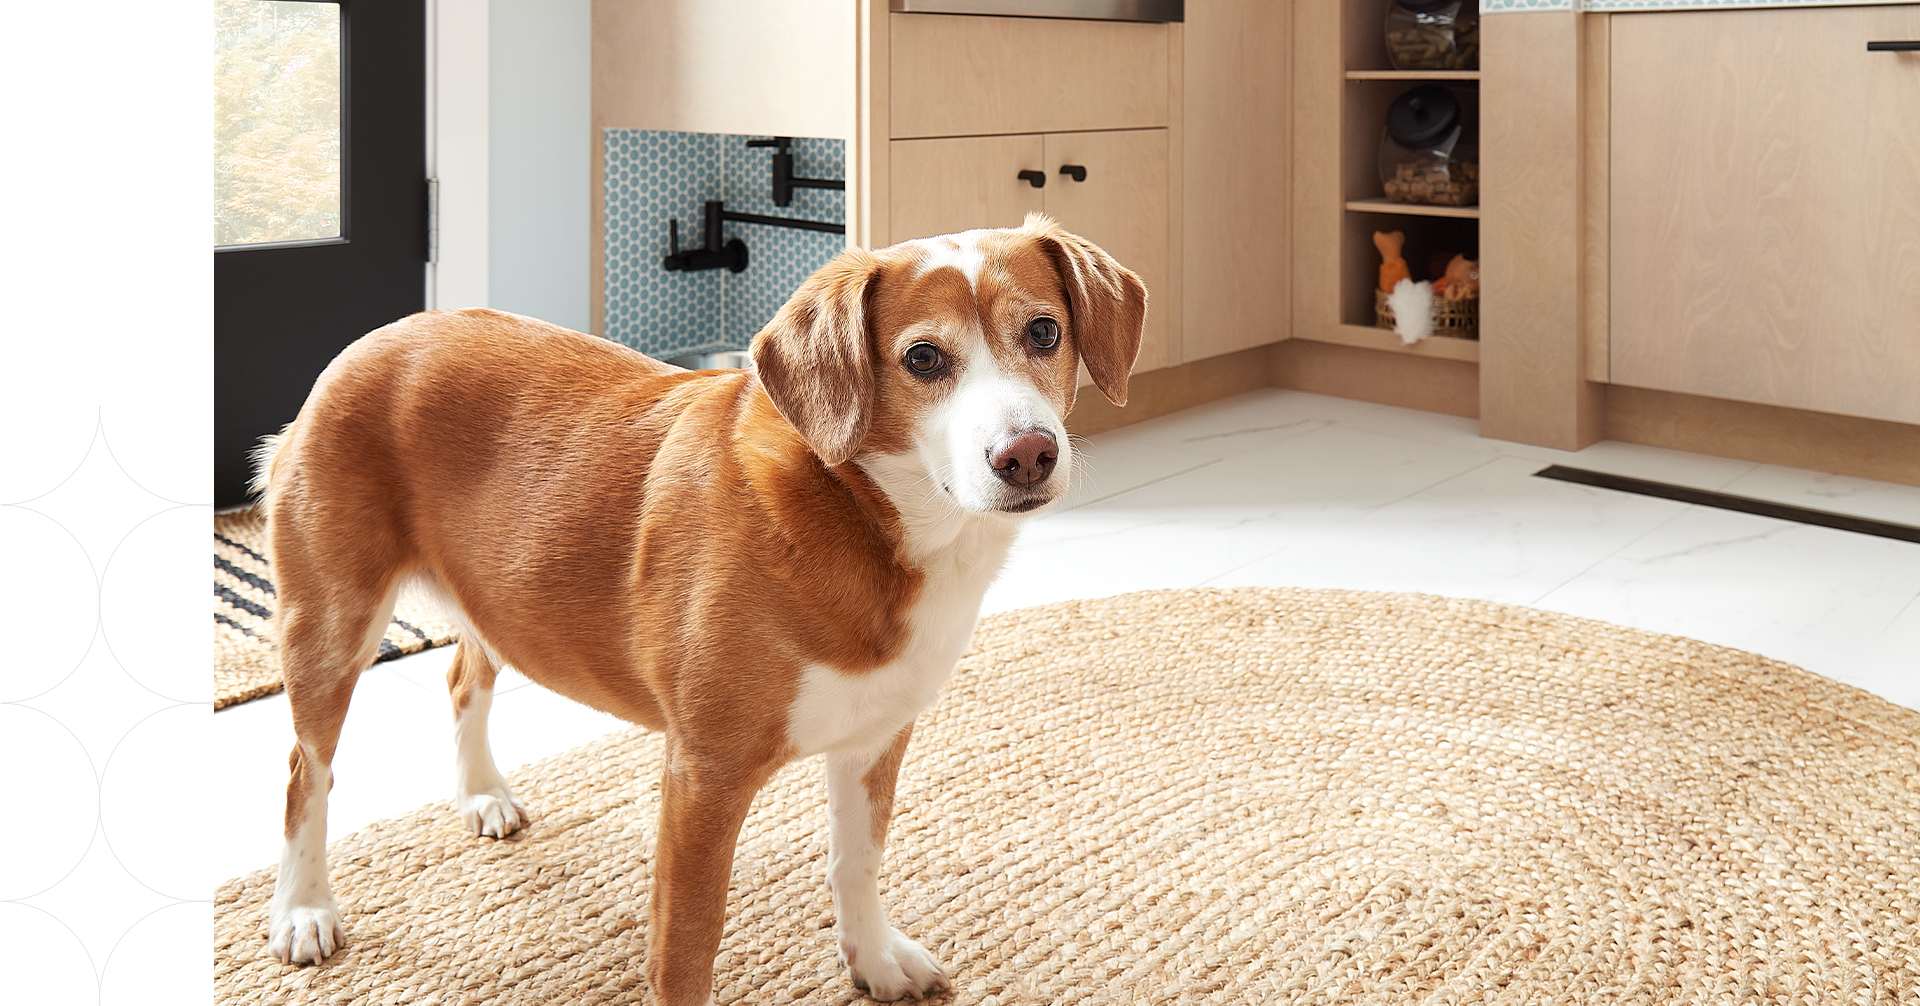 11 Upgrades for a Pet-Friendly Mudroom​